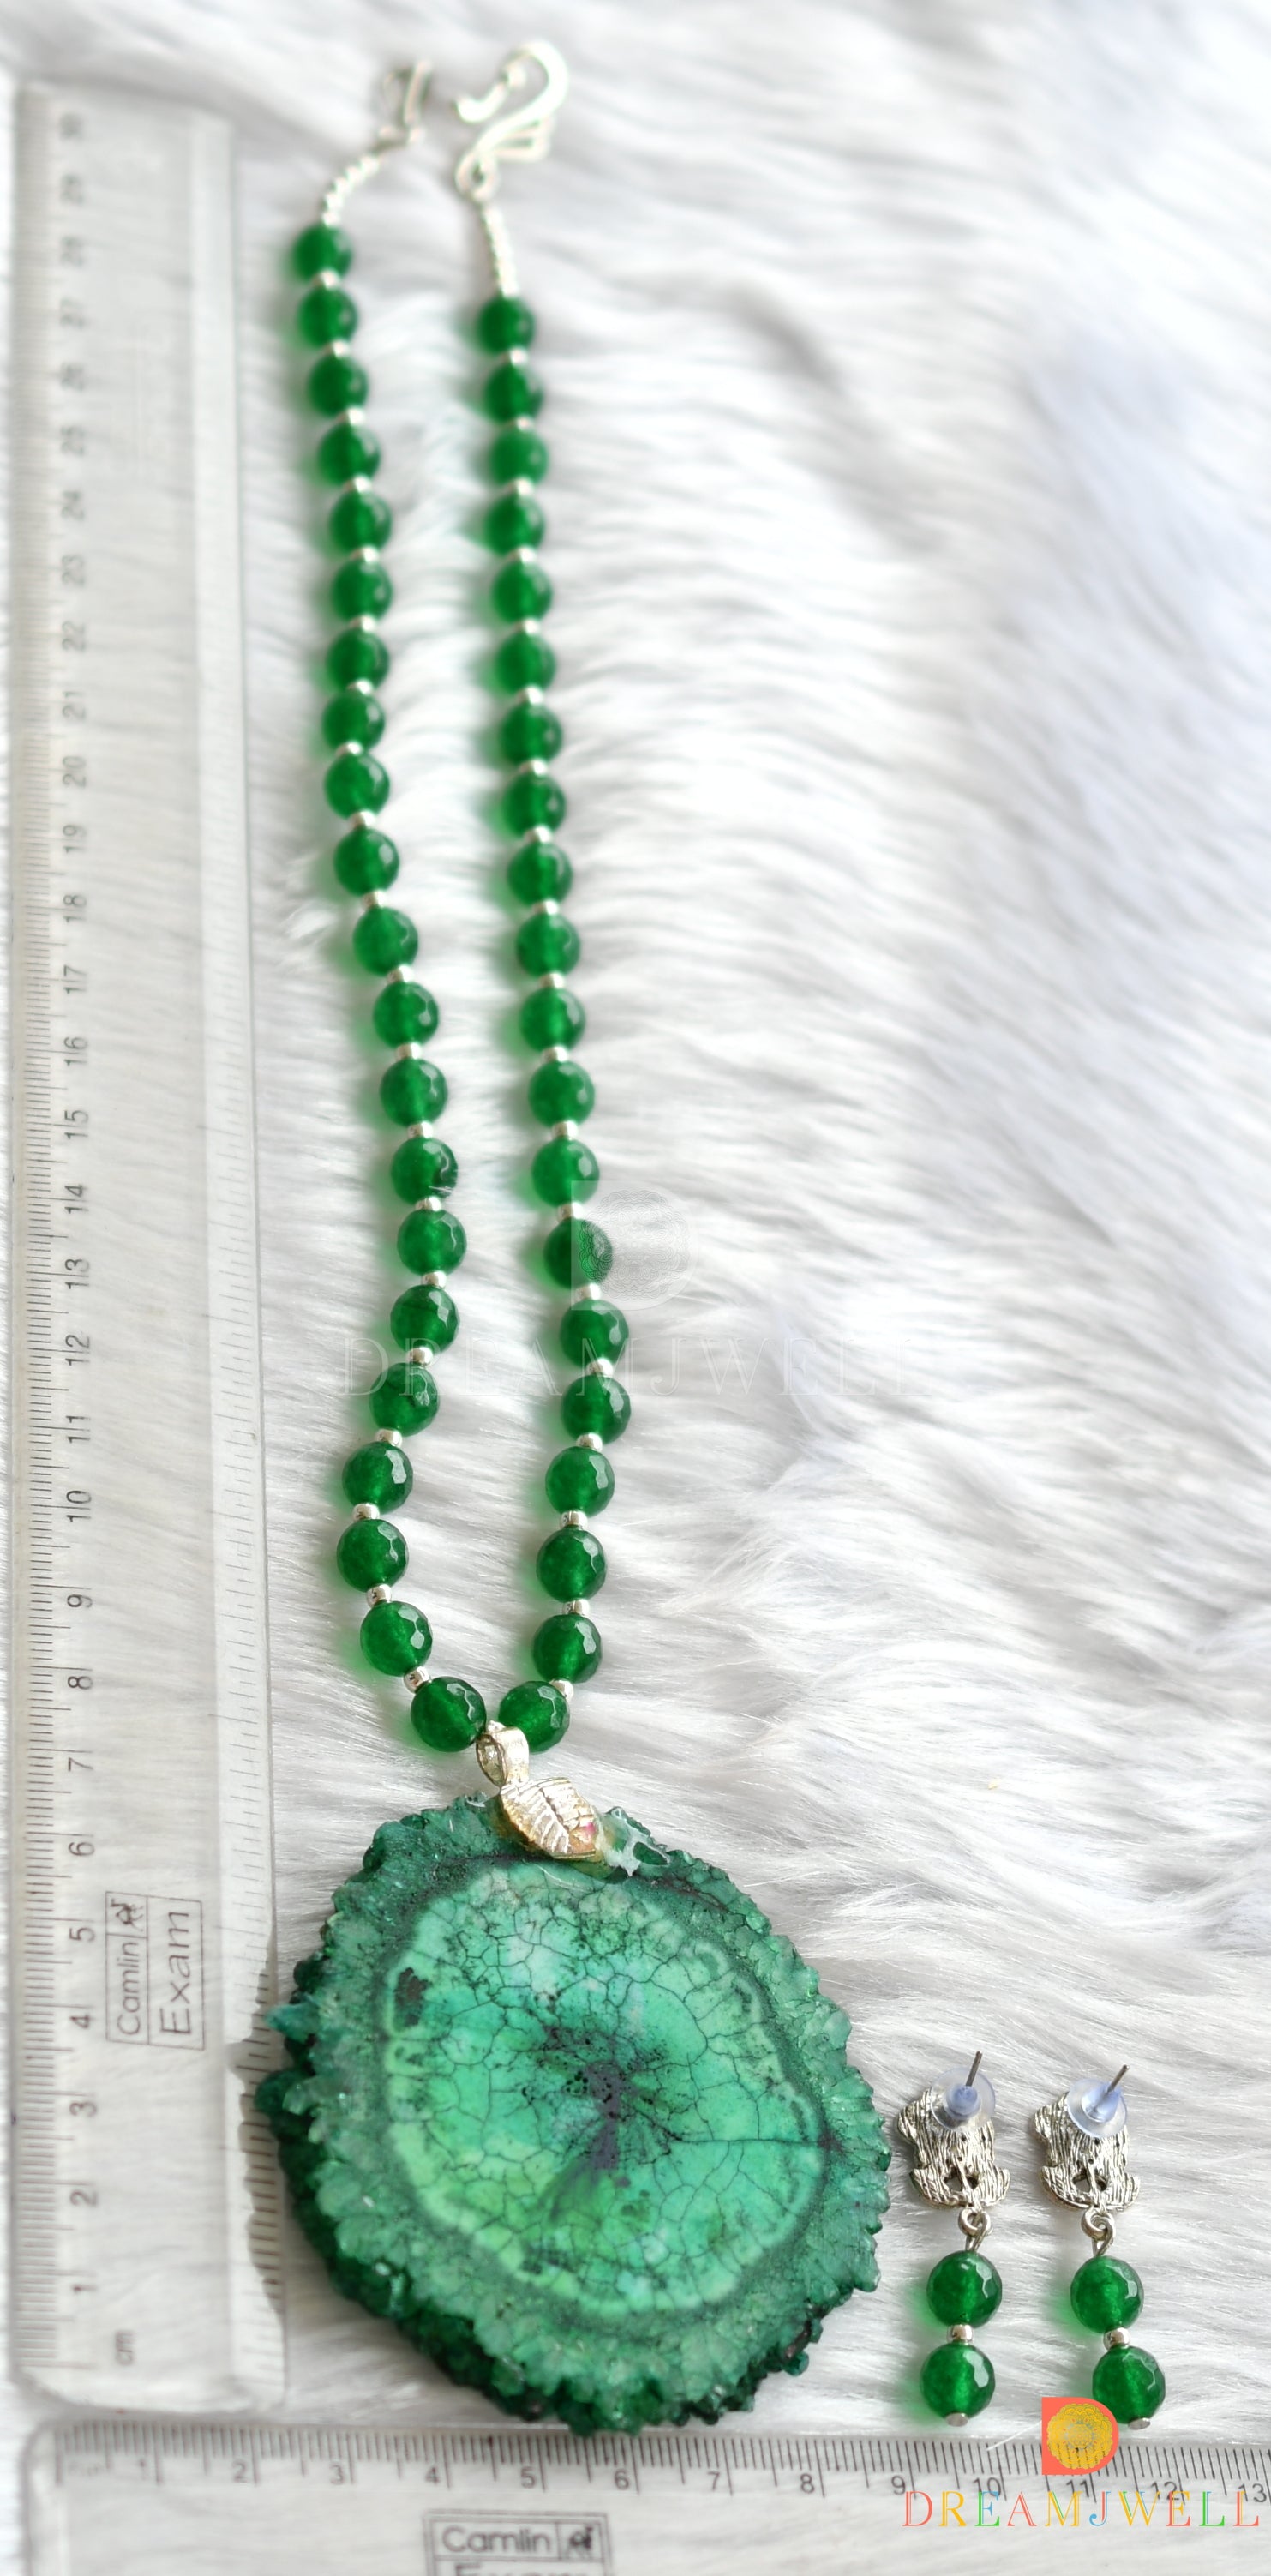 2 Layer (Light Green) Agate Necklace with Onyx Beads